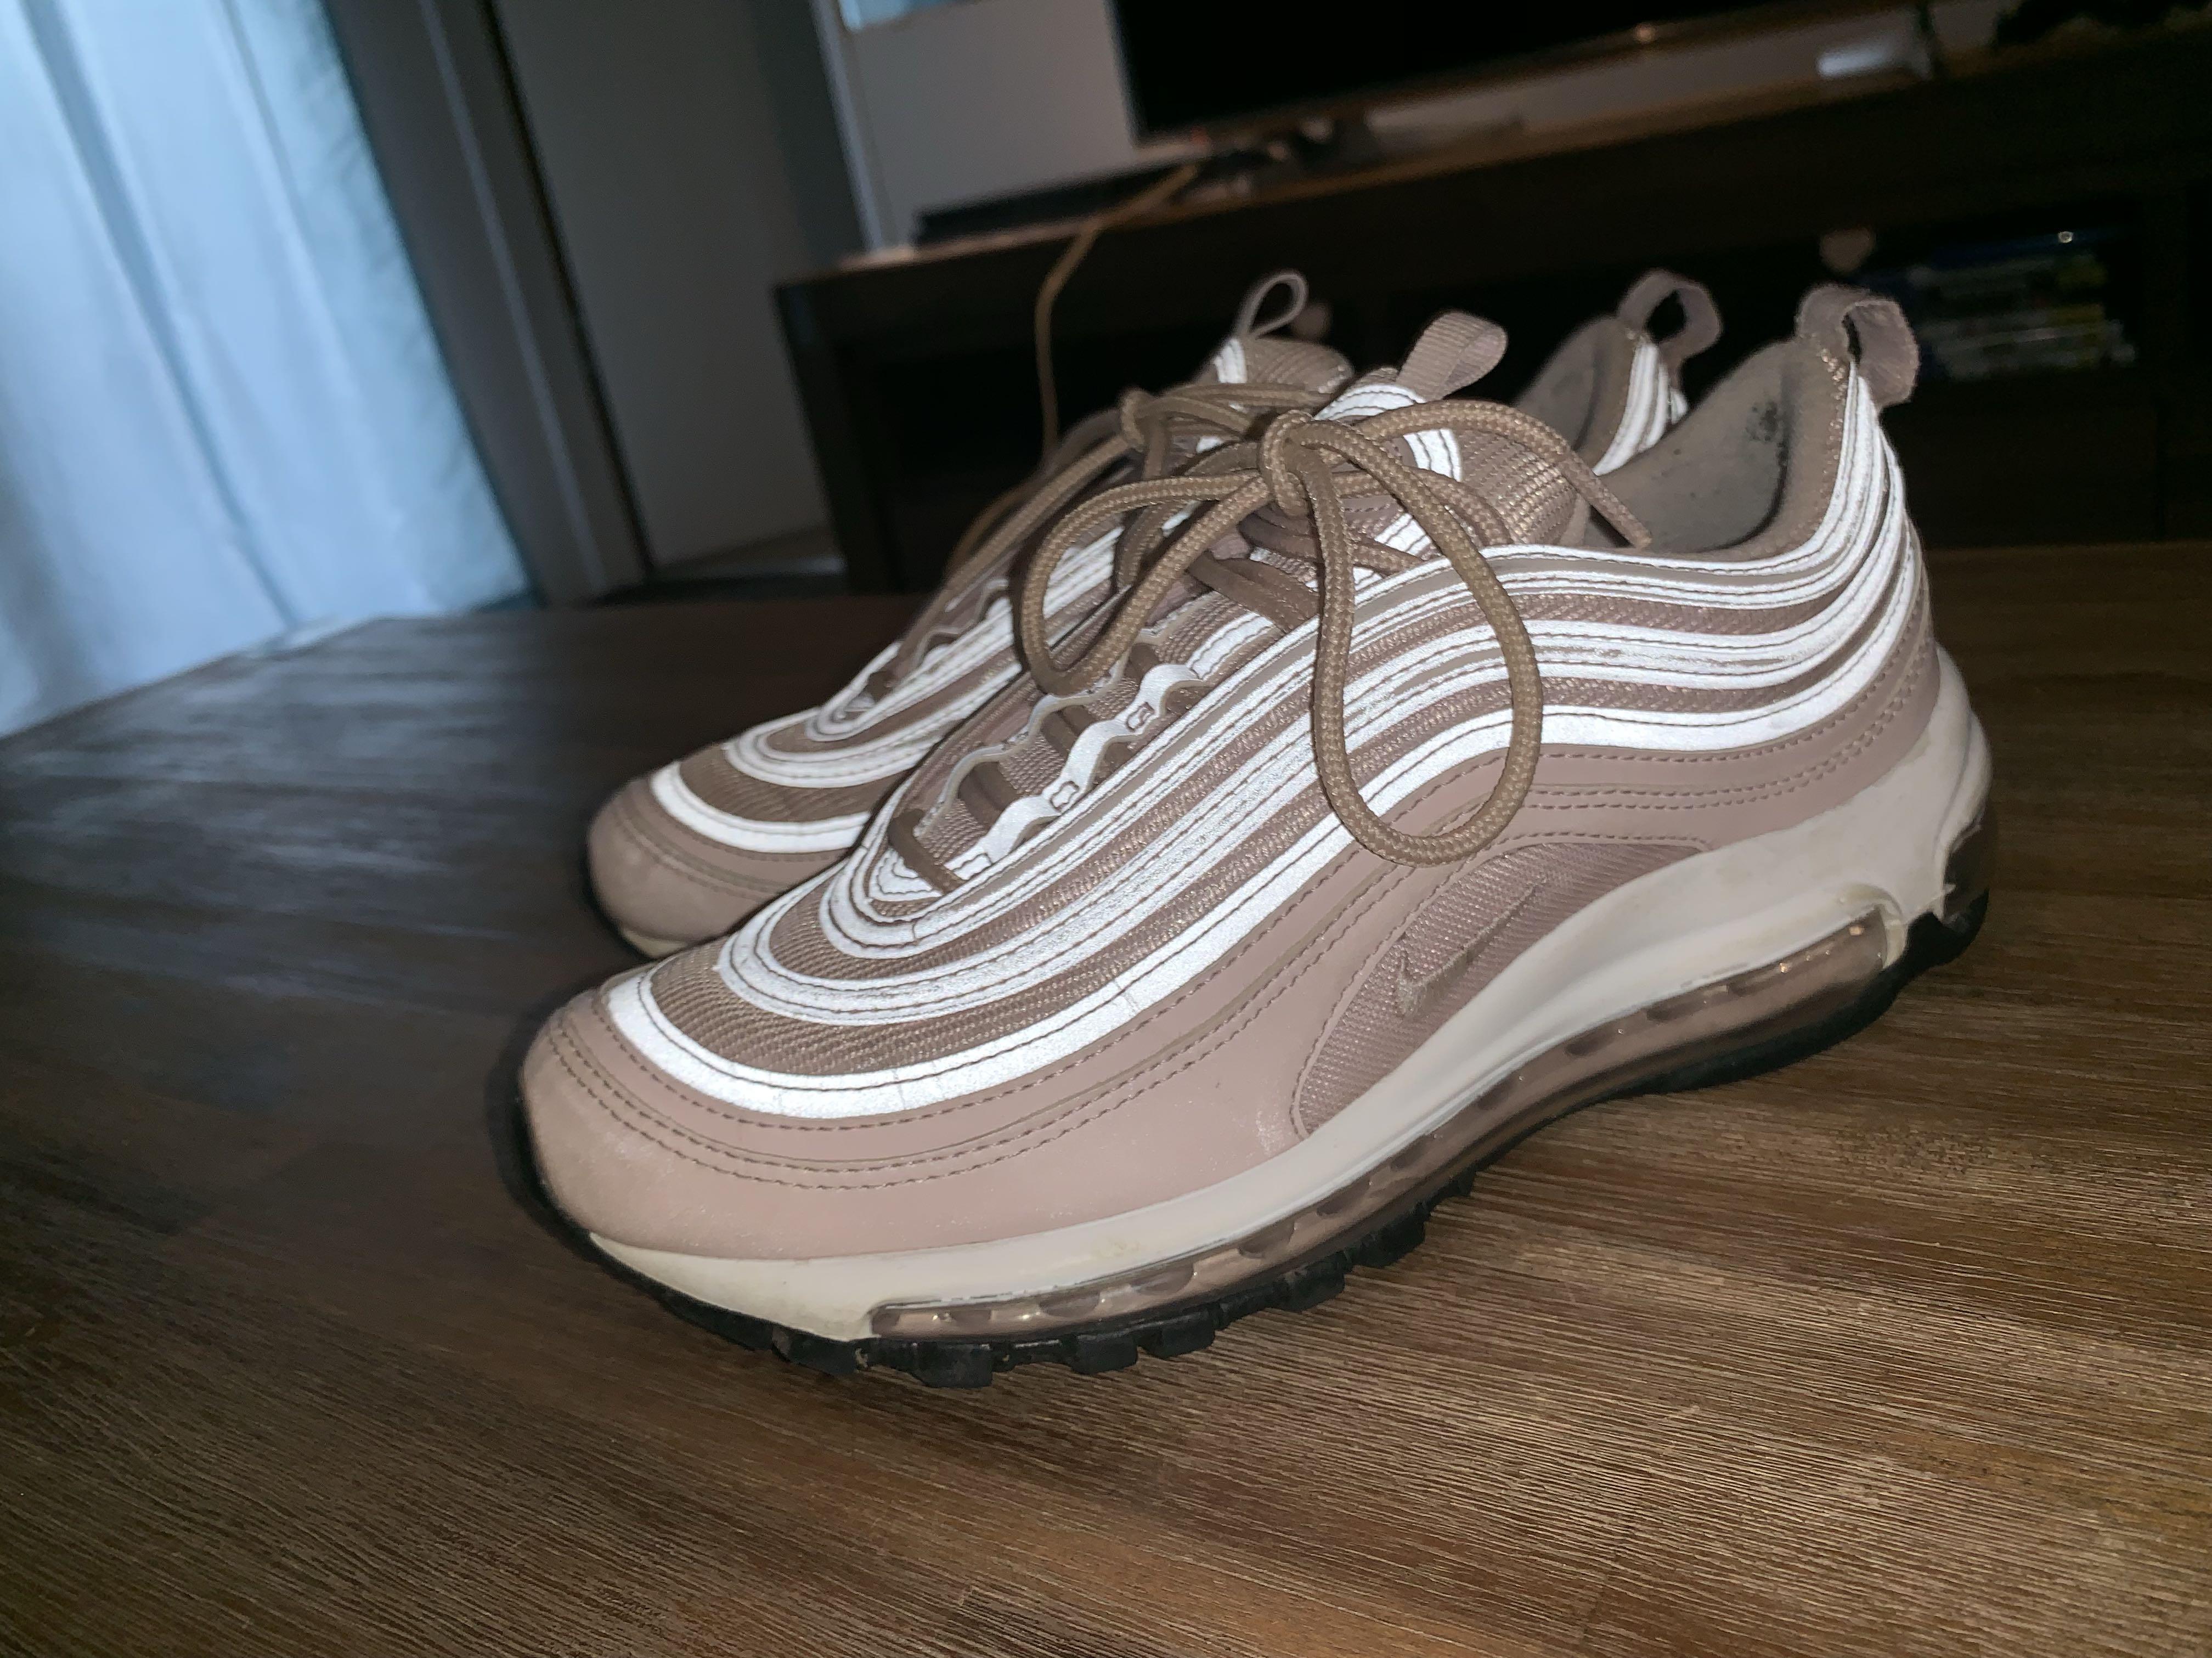 nike air max 97 size in cm